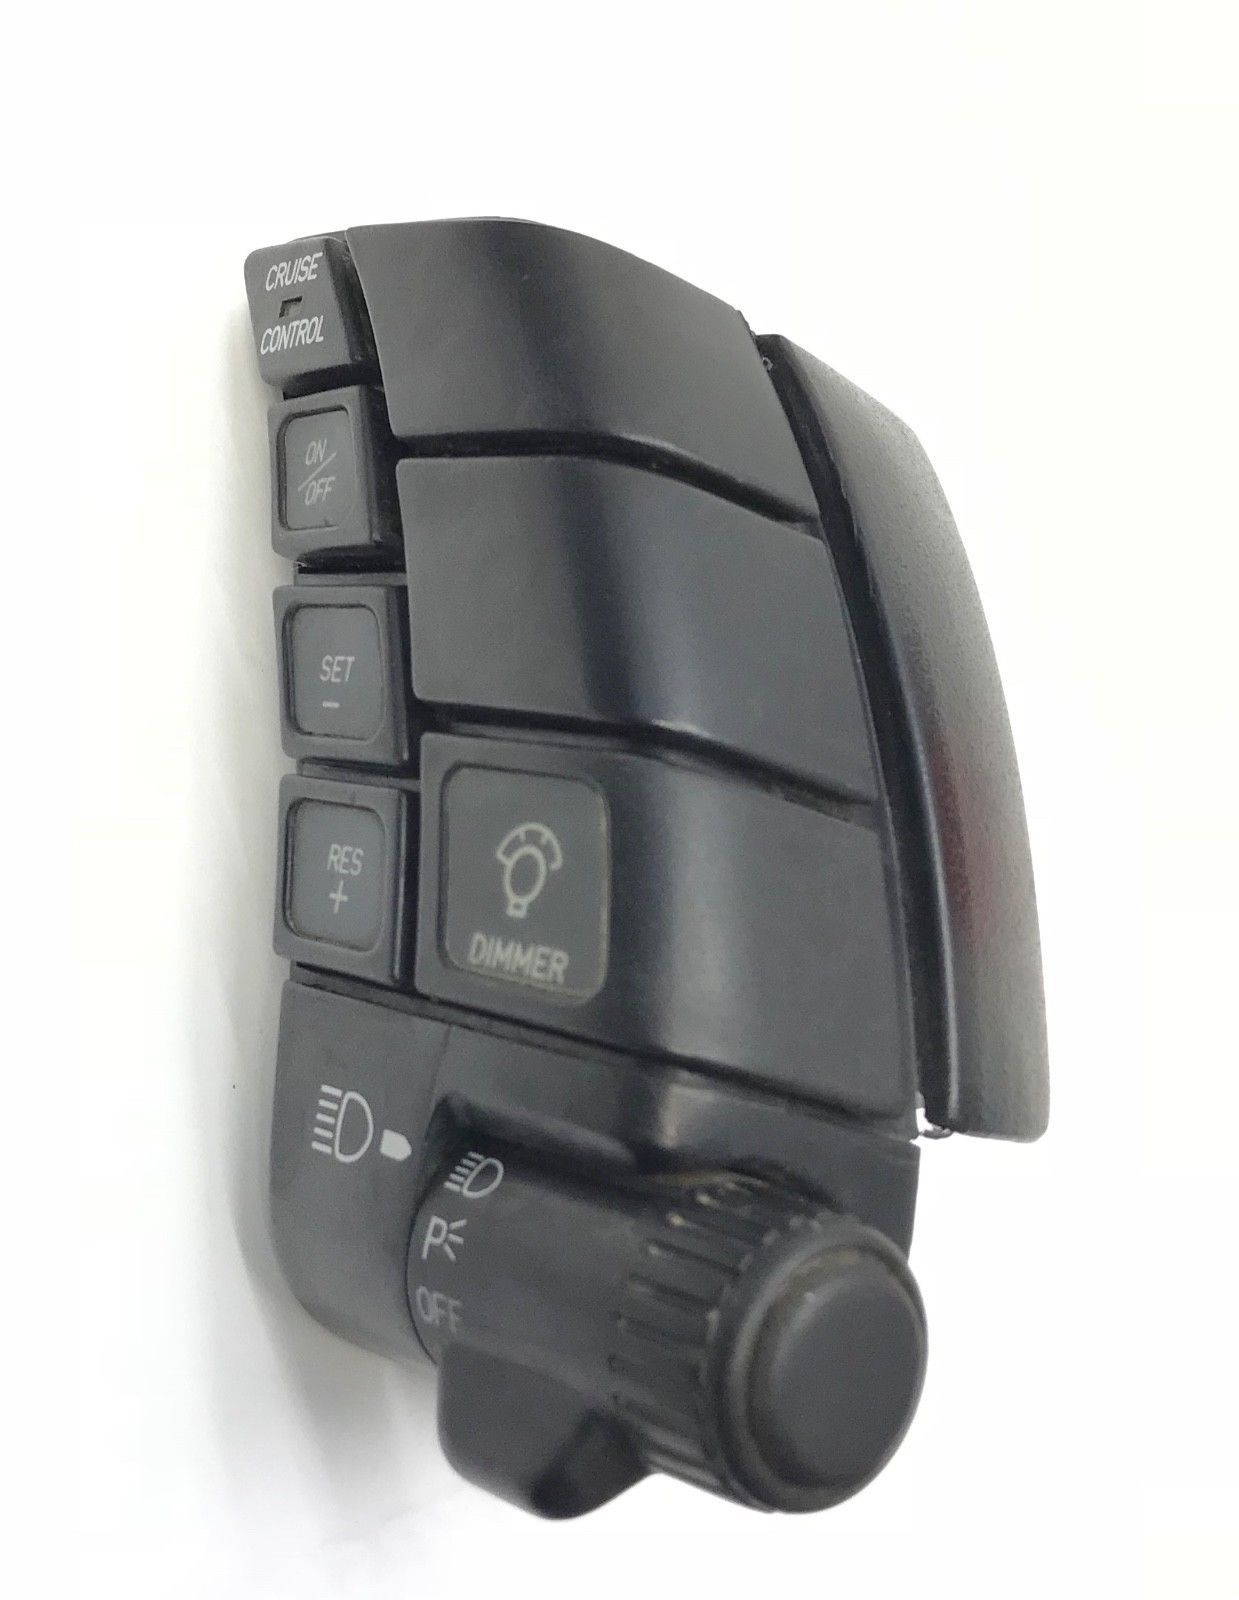 cruise control dimmer switch